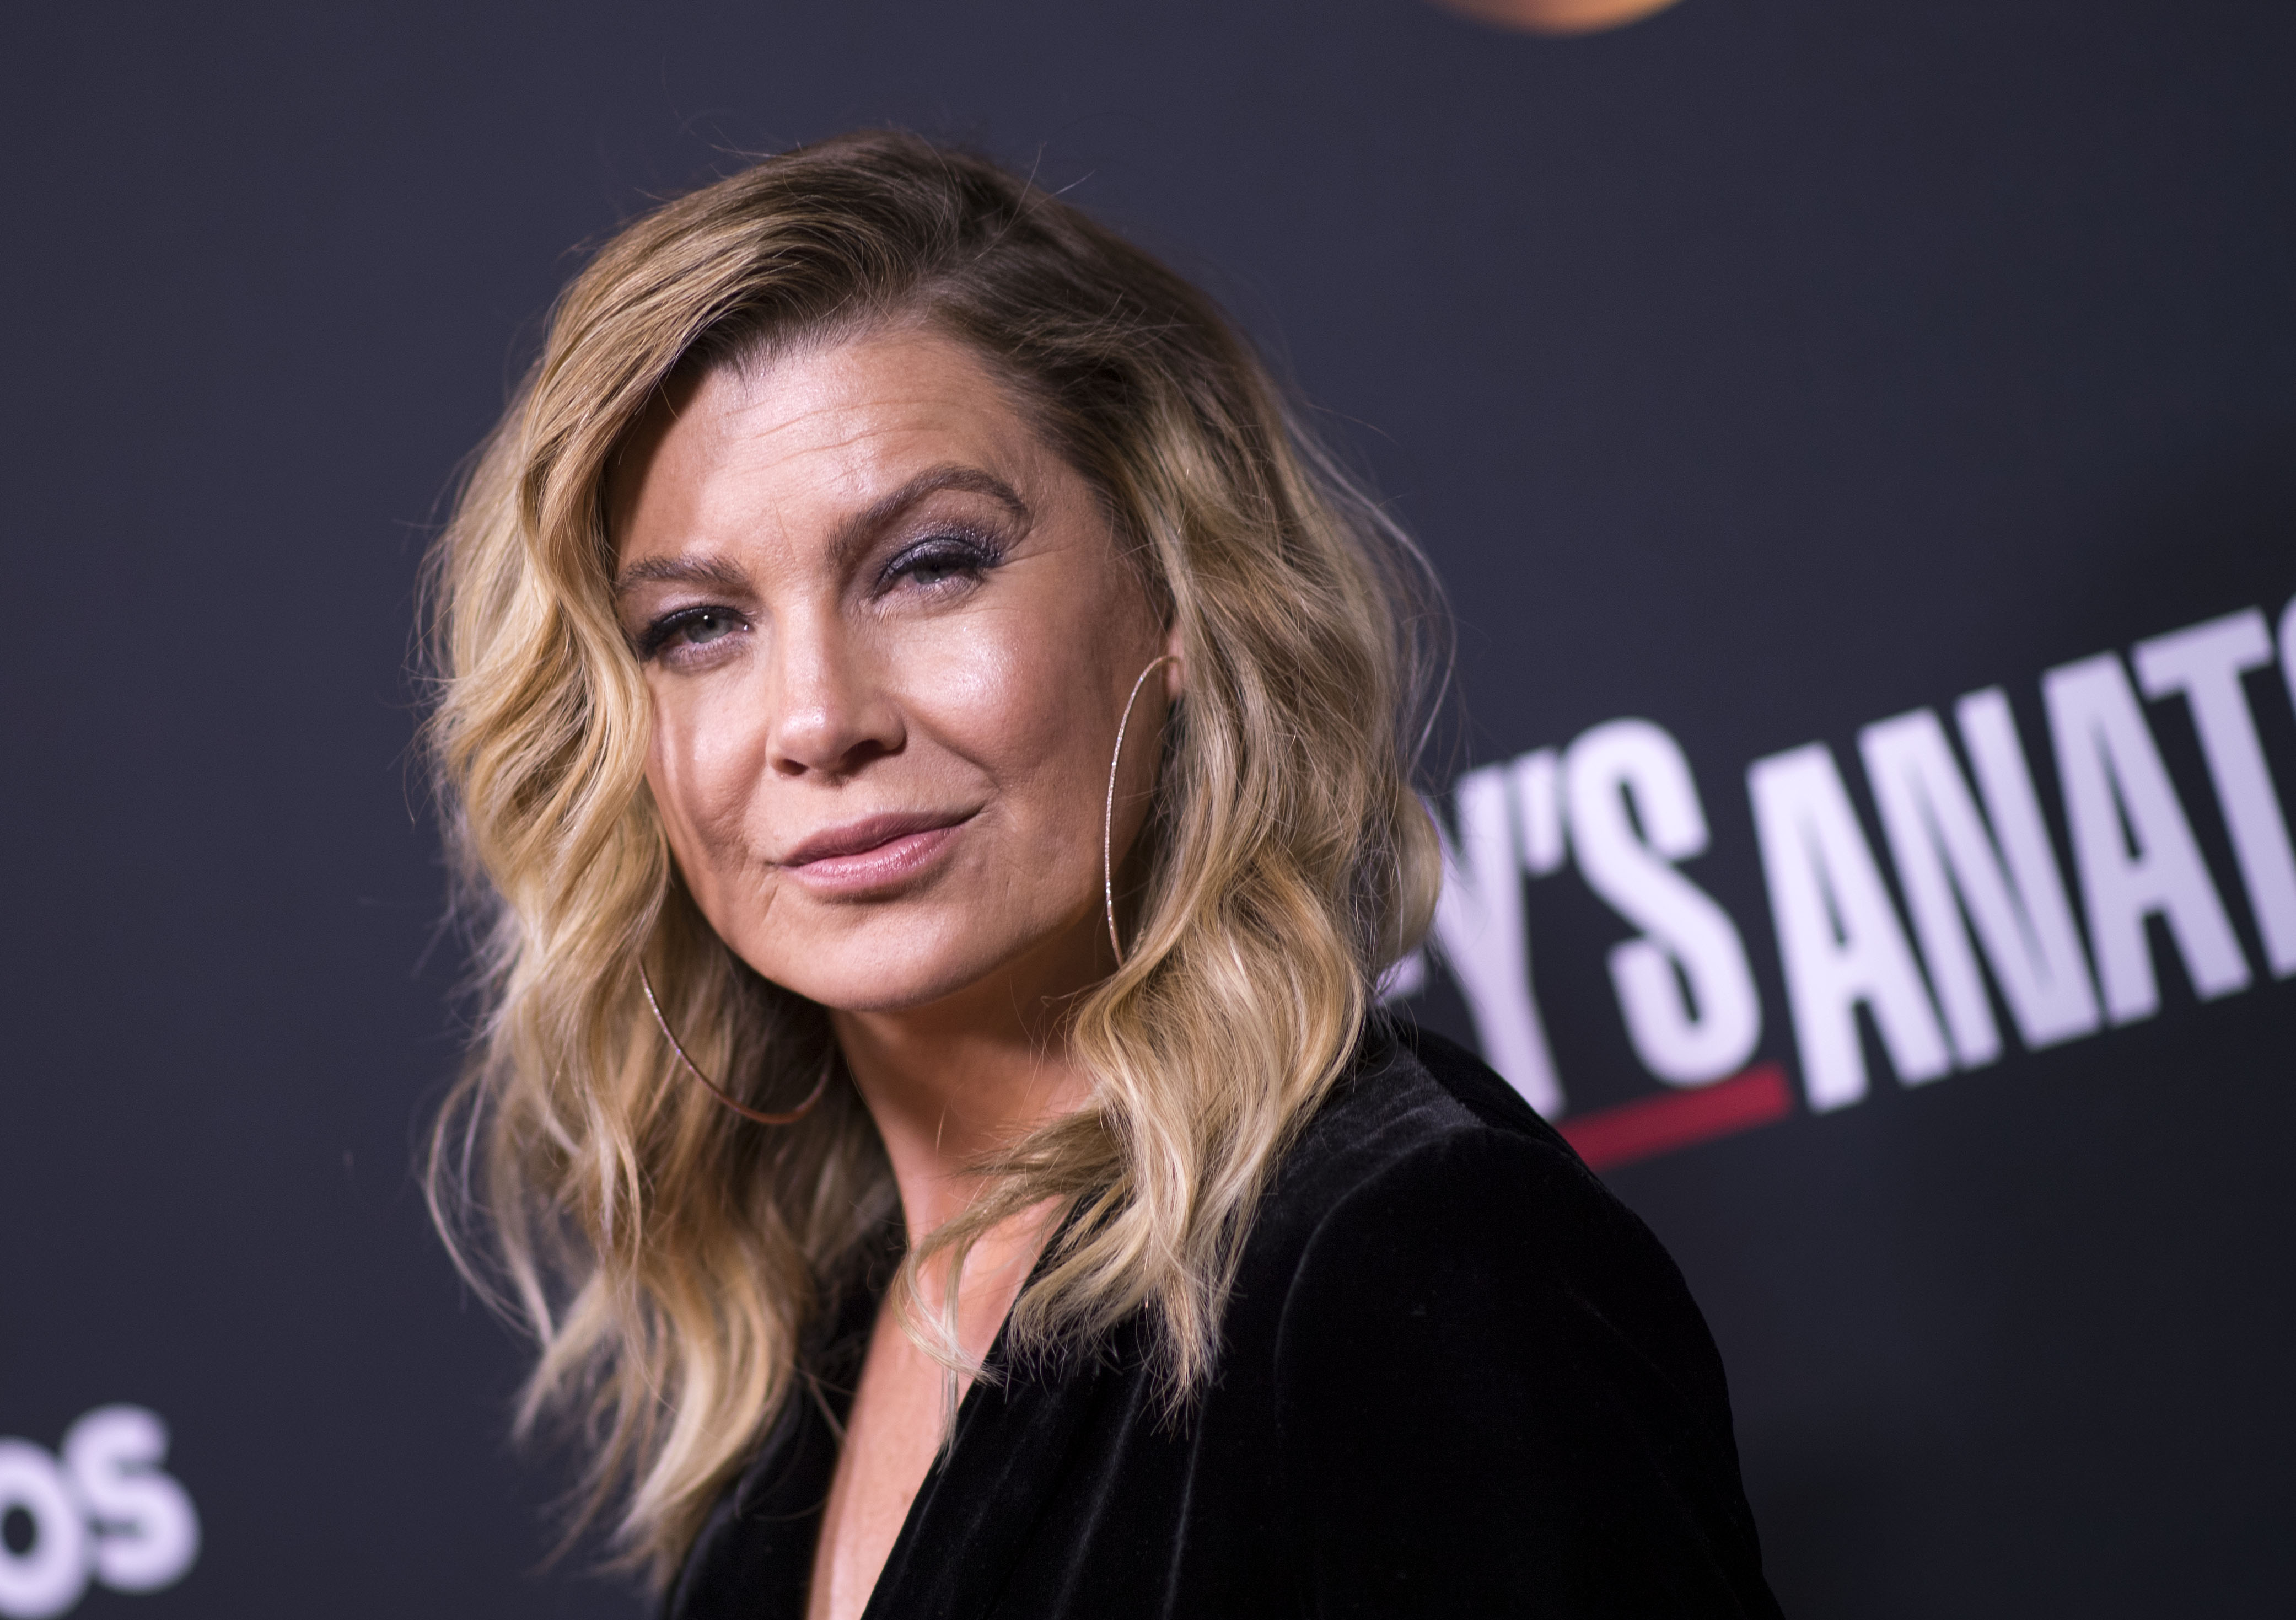 Ellen Pompeo: My Raise Has Nothing to Do With 'Grey's Anatomy' Casting Shakeup